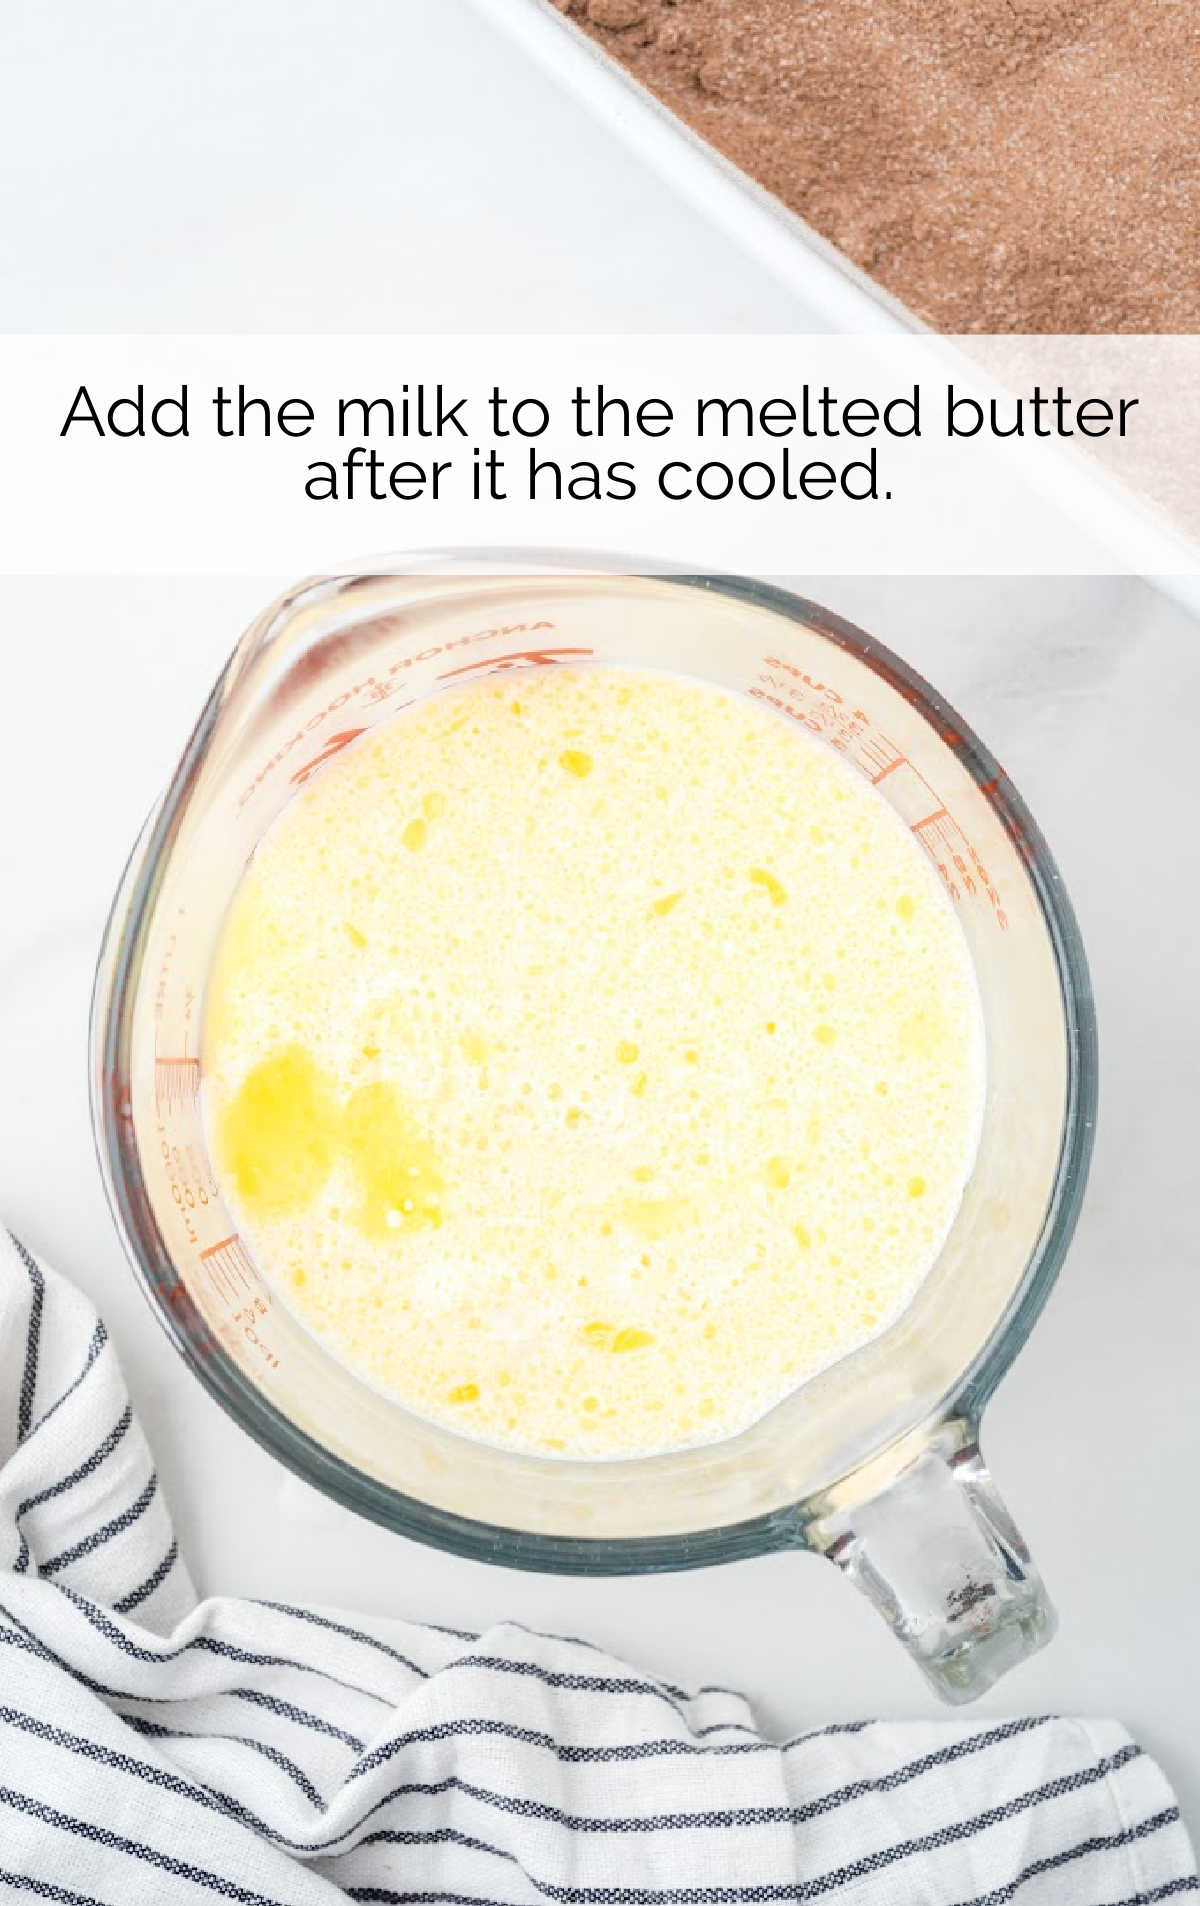 melted butter and milk in a cup